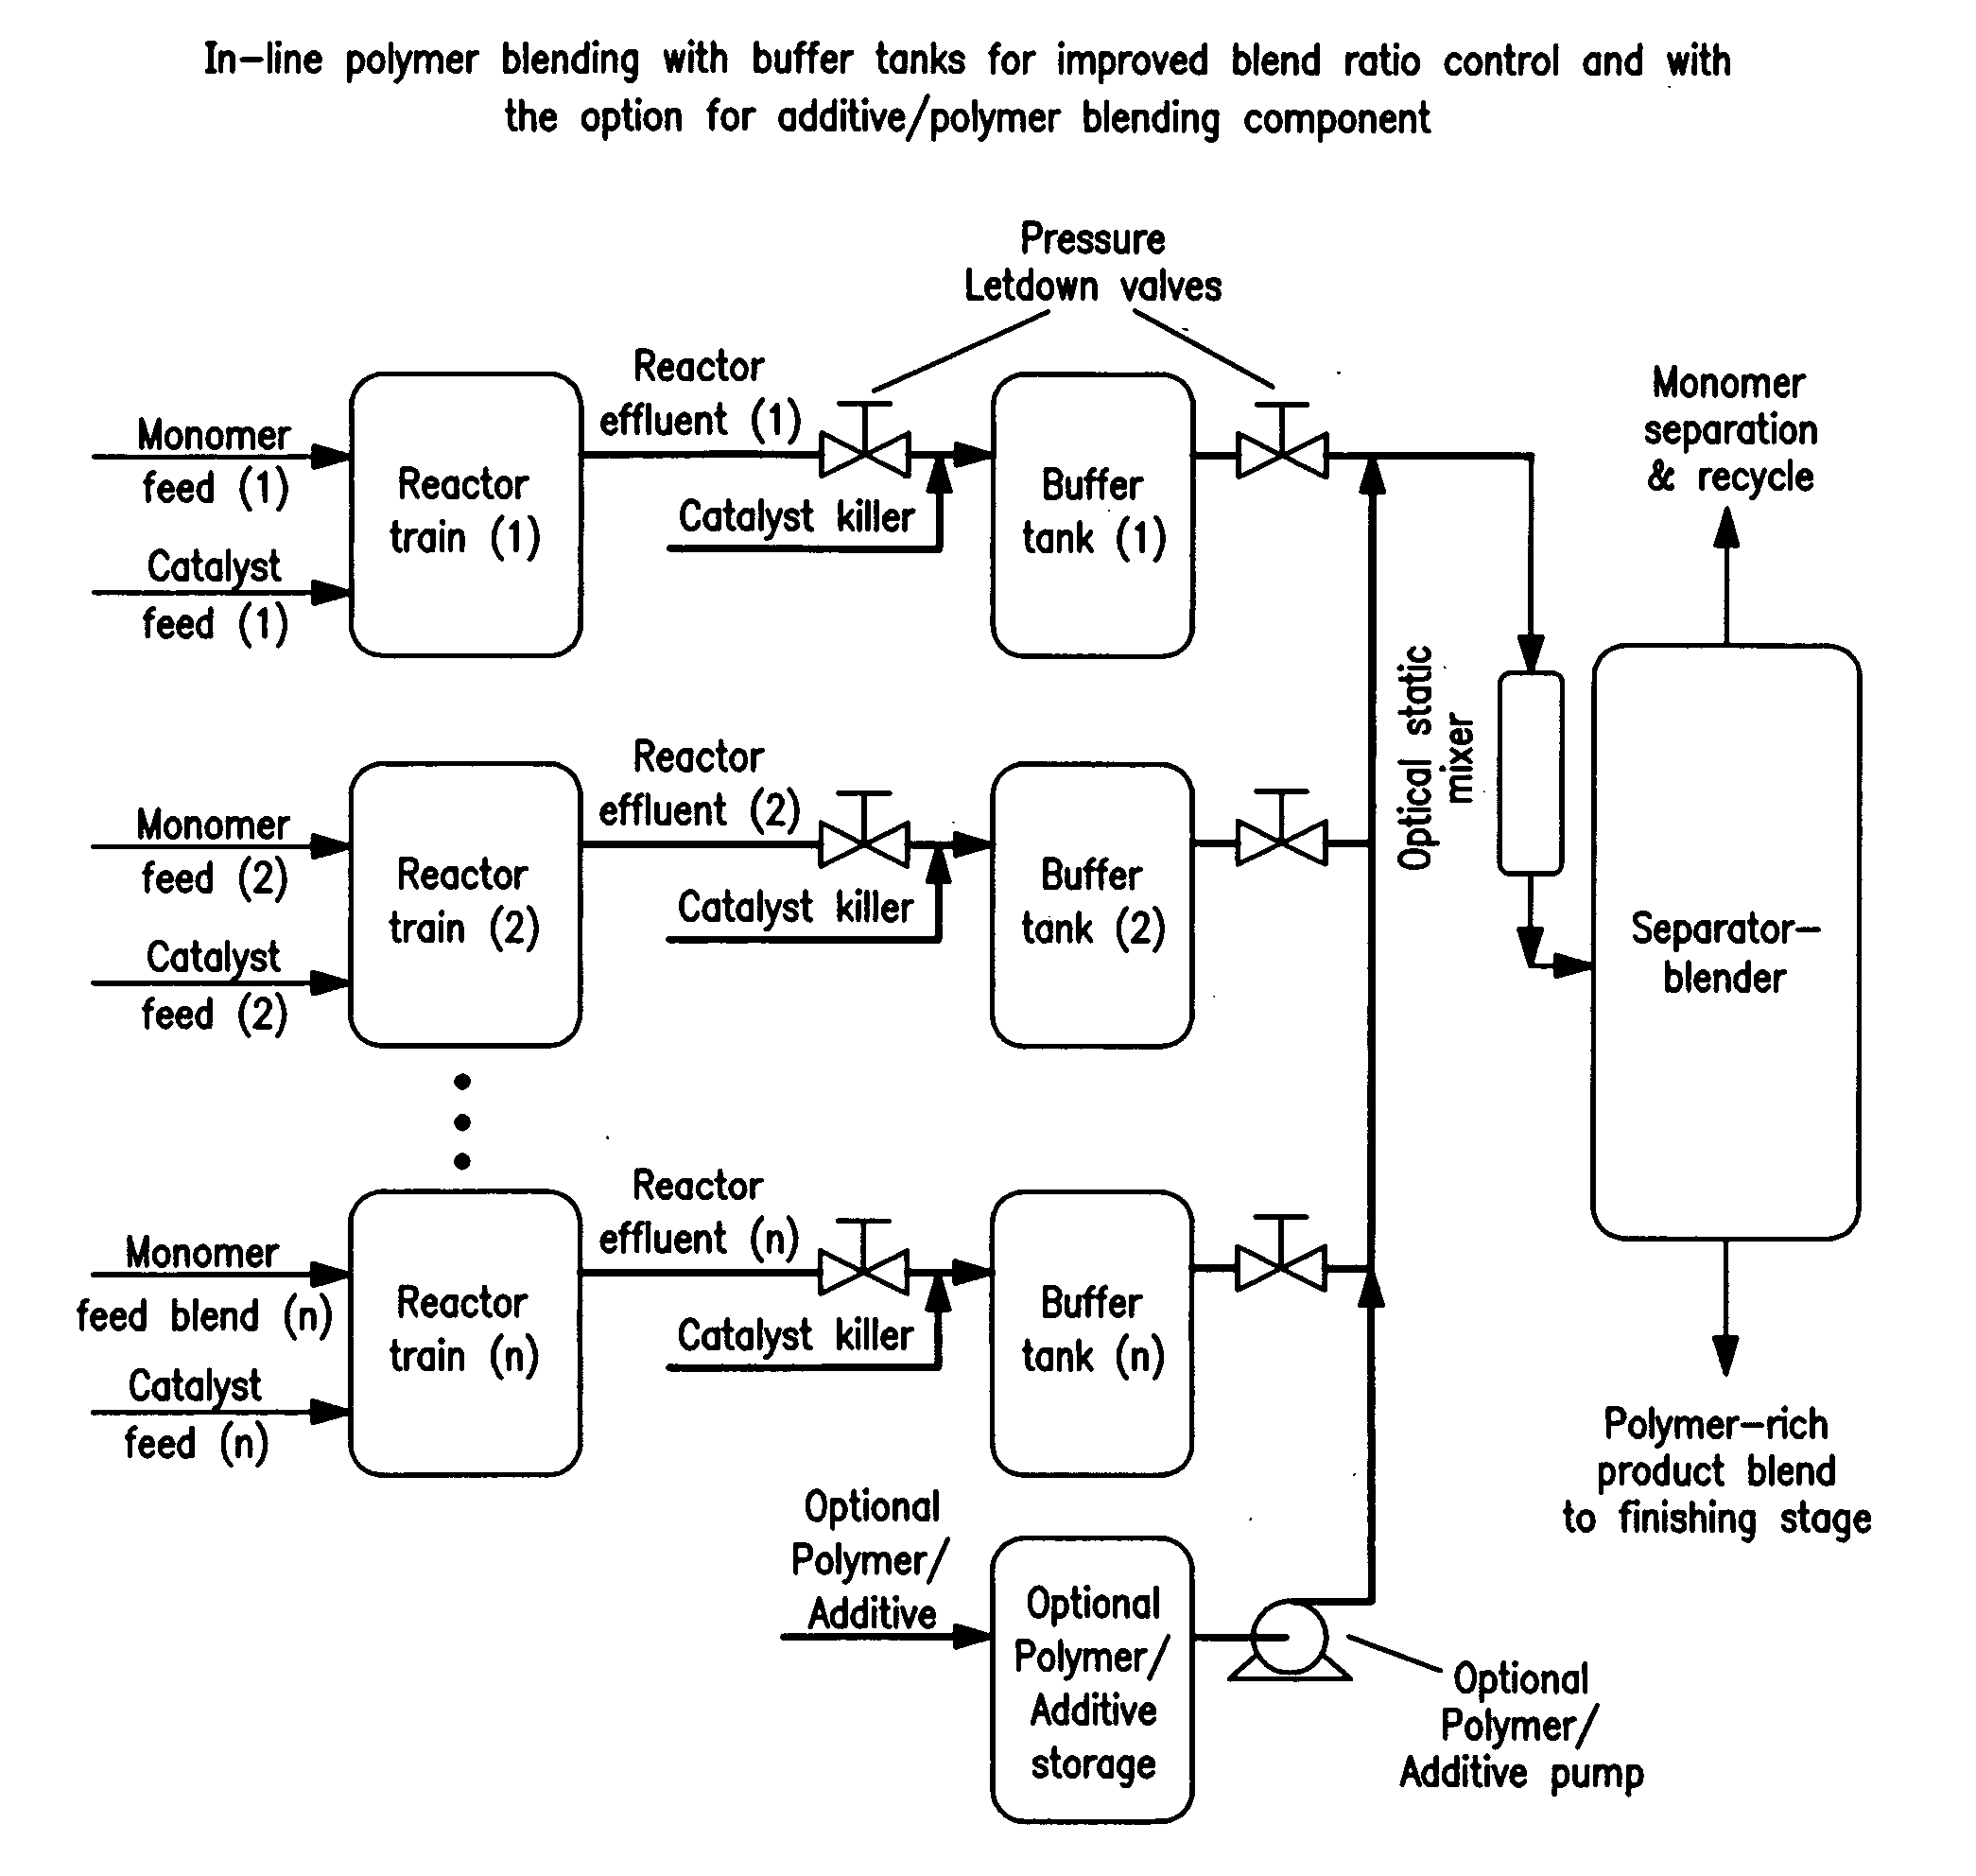 Process for fluid phase in-line blending of polymers